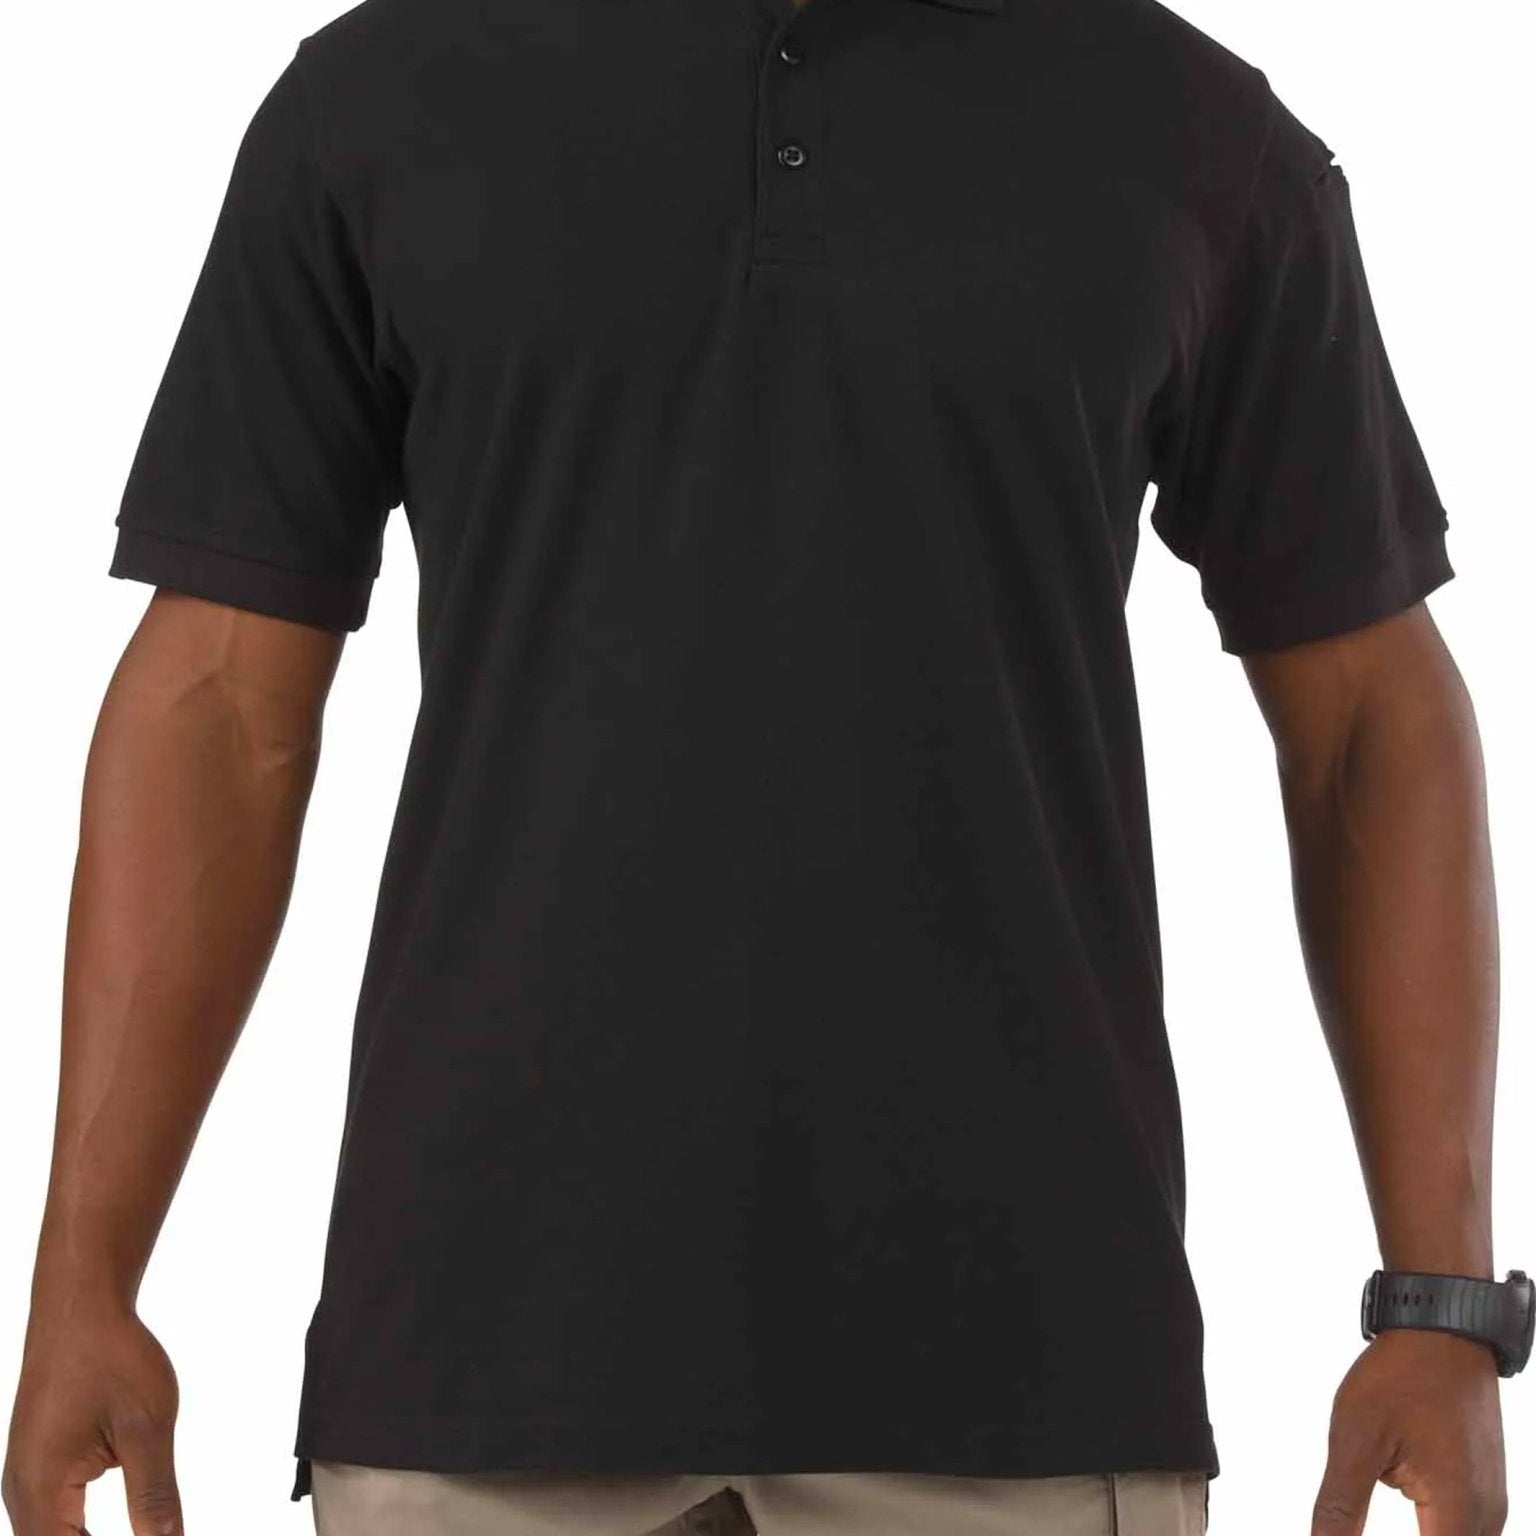 4elementsclothing5.11 Tactical5.11 Tactical - 5.11 Utility Short Sleeve Polo Shirt - Cotton / Polyester Pique - Style 41180T-Shirt41180-019-XS